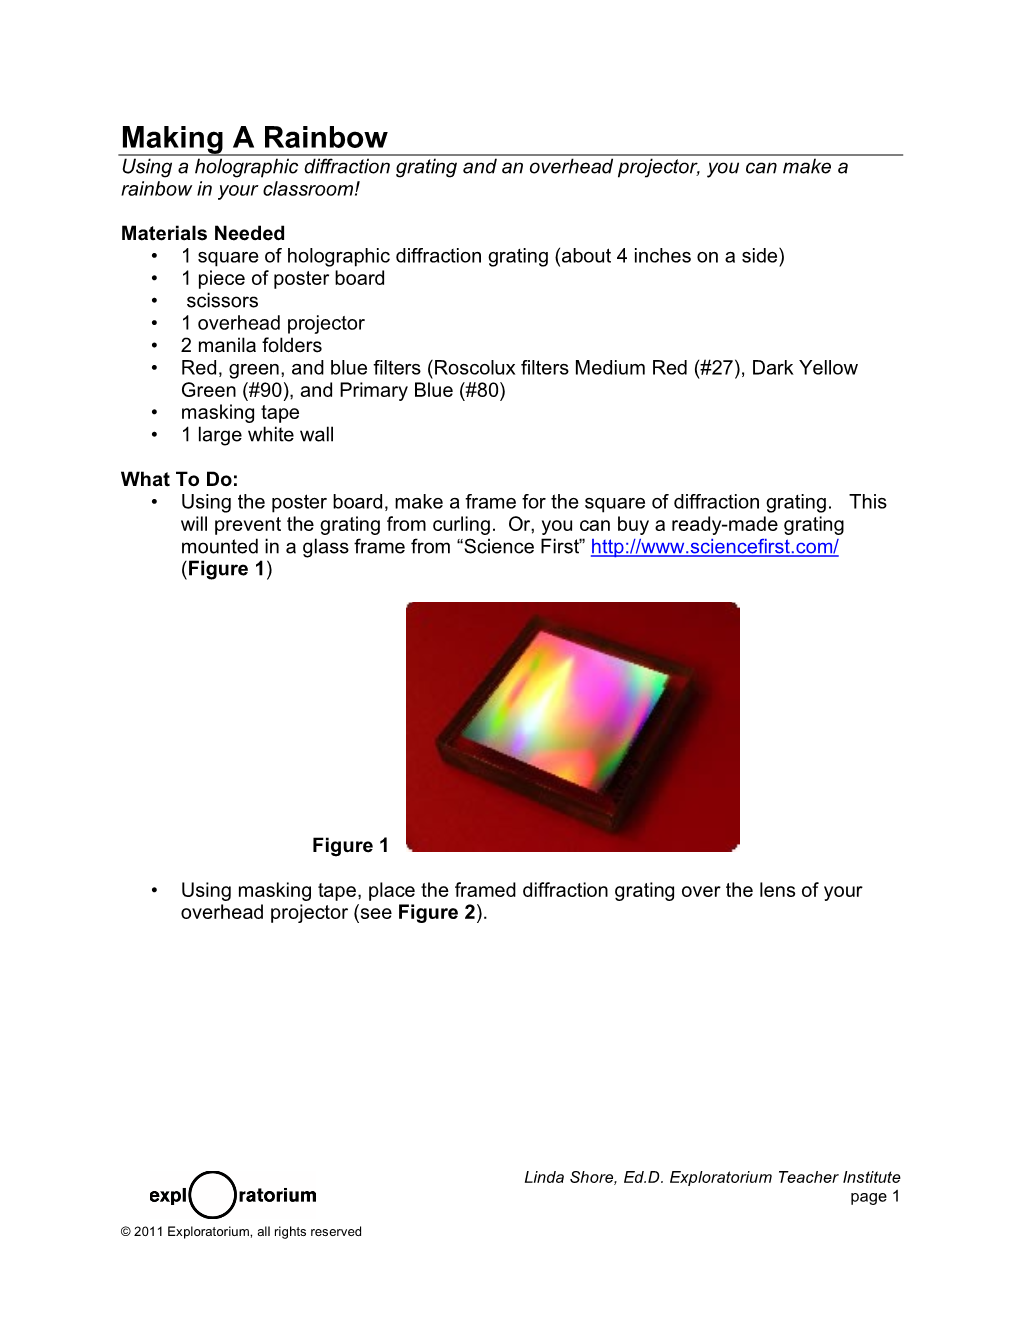 Making a Rainbow Using a Holographic Diffraction Grating and an Overhead Projector, You Can Make a Rainbow in Your Classroom!